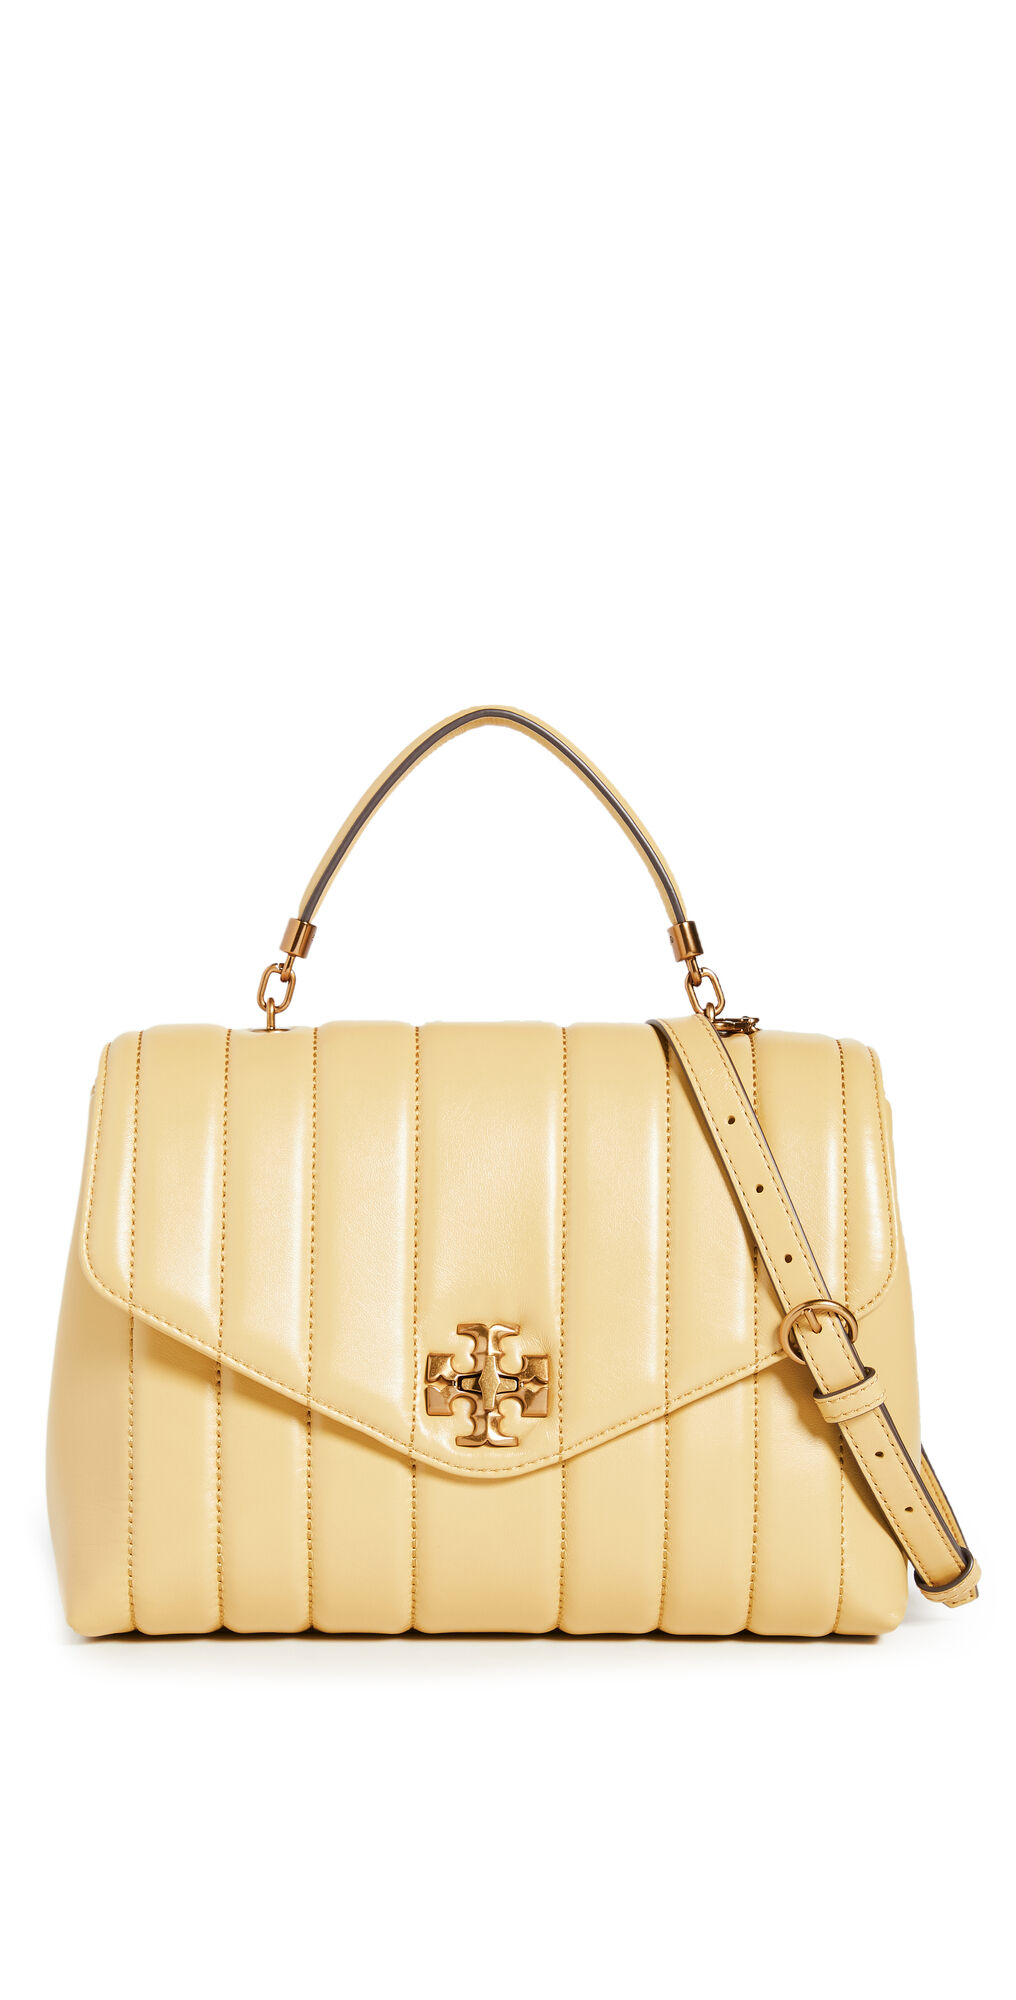 Tory Burch Kira Top Handle Satchel Beeswax One Size  Beeswax  size:One Size